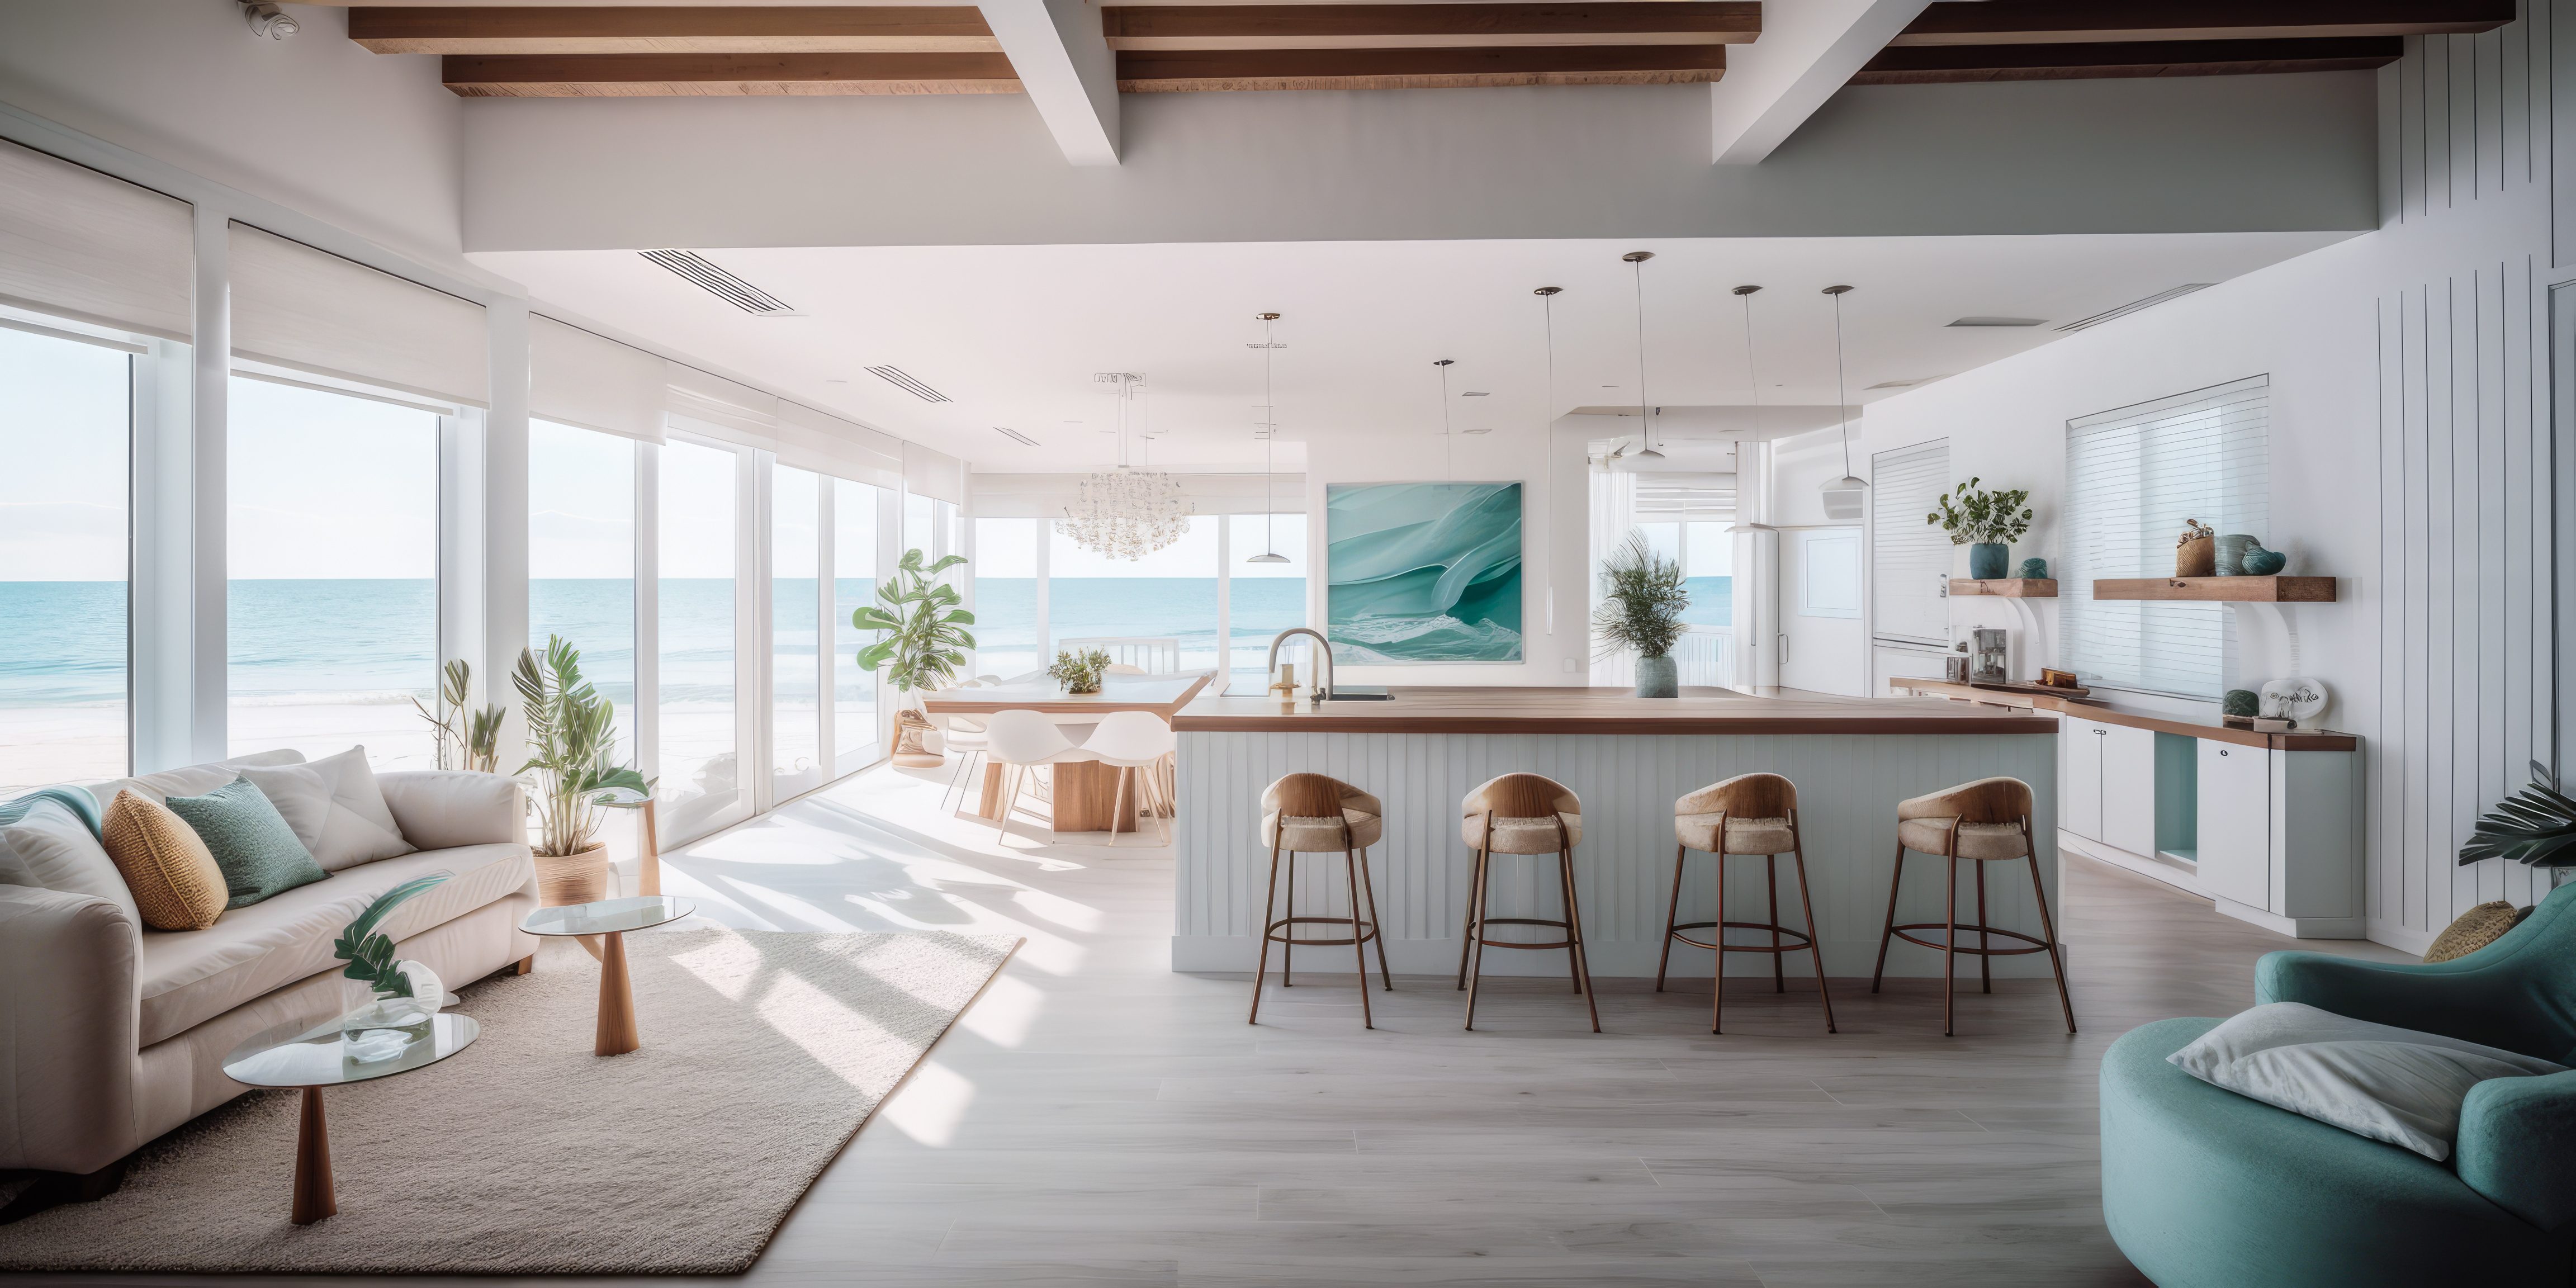 Beach house with ocean views looking outside from the kitchen